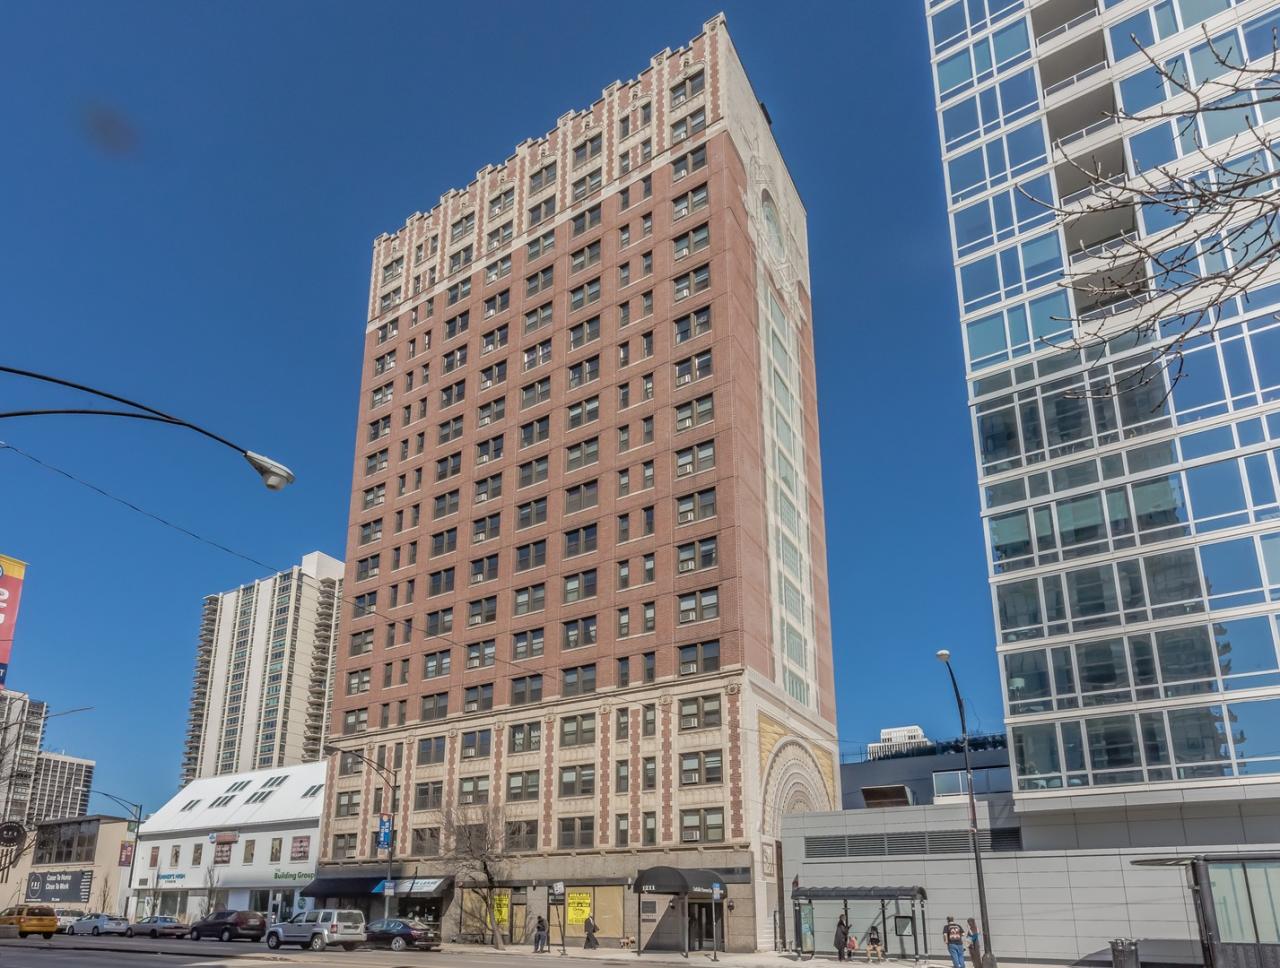 Maps and Schools 1211 N LASALLE Street, Unit #1403, Chicago, IL 60610: Homes for Sale - Hommati  93384219f7b52c4c6eee49c36d85b4c9